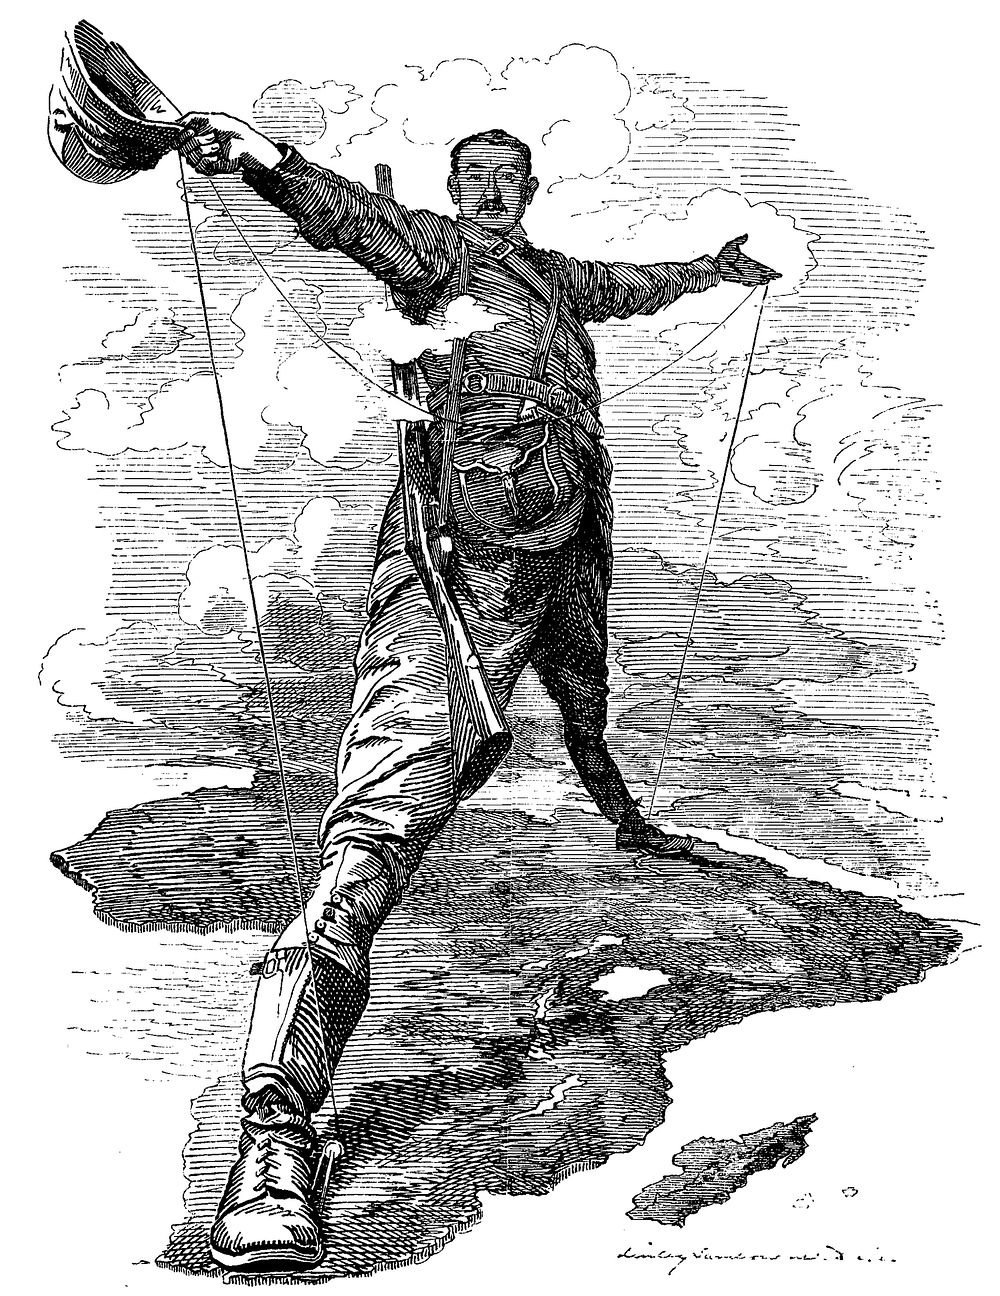 The Rhodes Colossus: Caricature of Cecil John Rhodes, after he announced plans for a telegraph line and railroad from Cape…